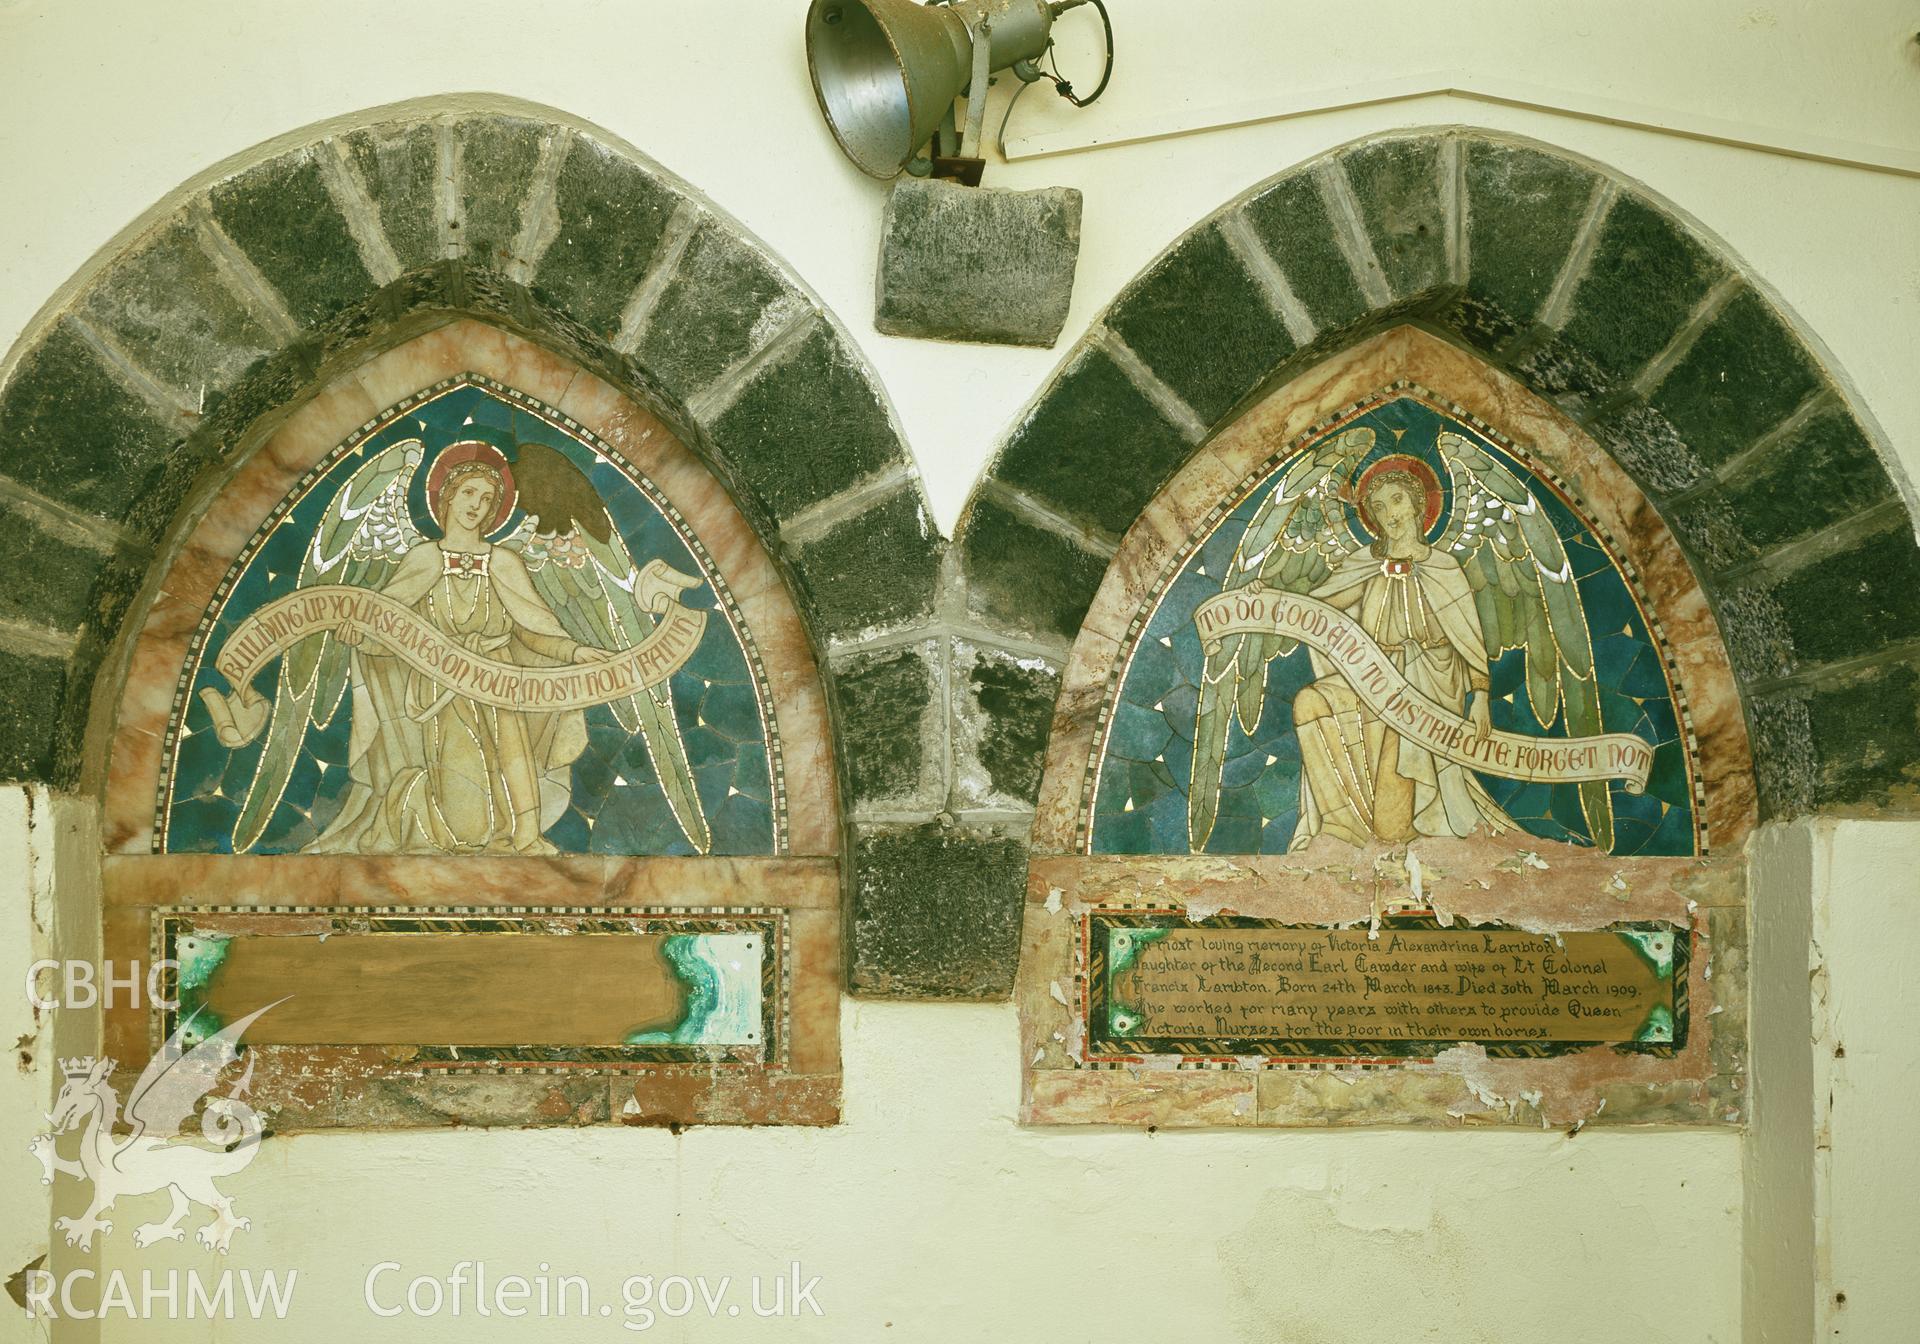 RCAHMW colour transparency showing a view of Lambton Memorial, in Flimston Church.